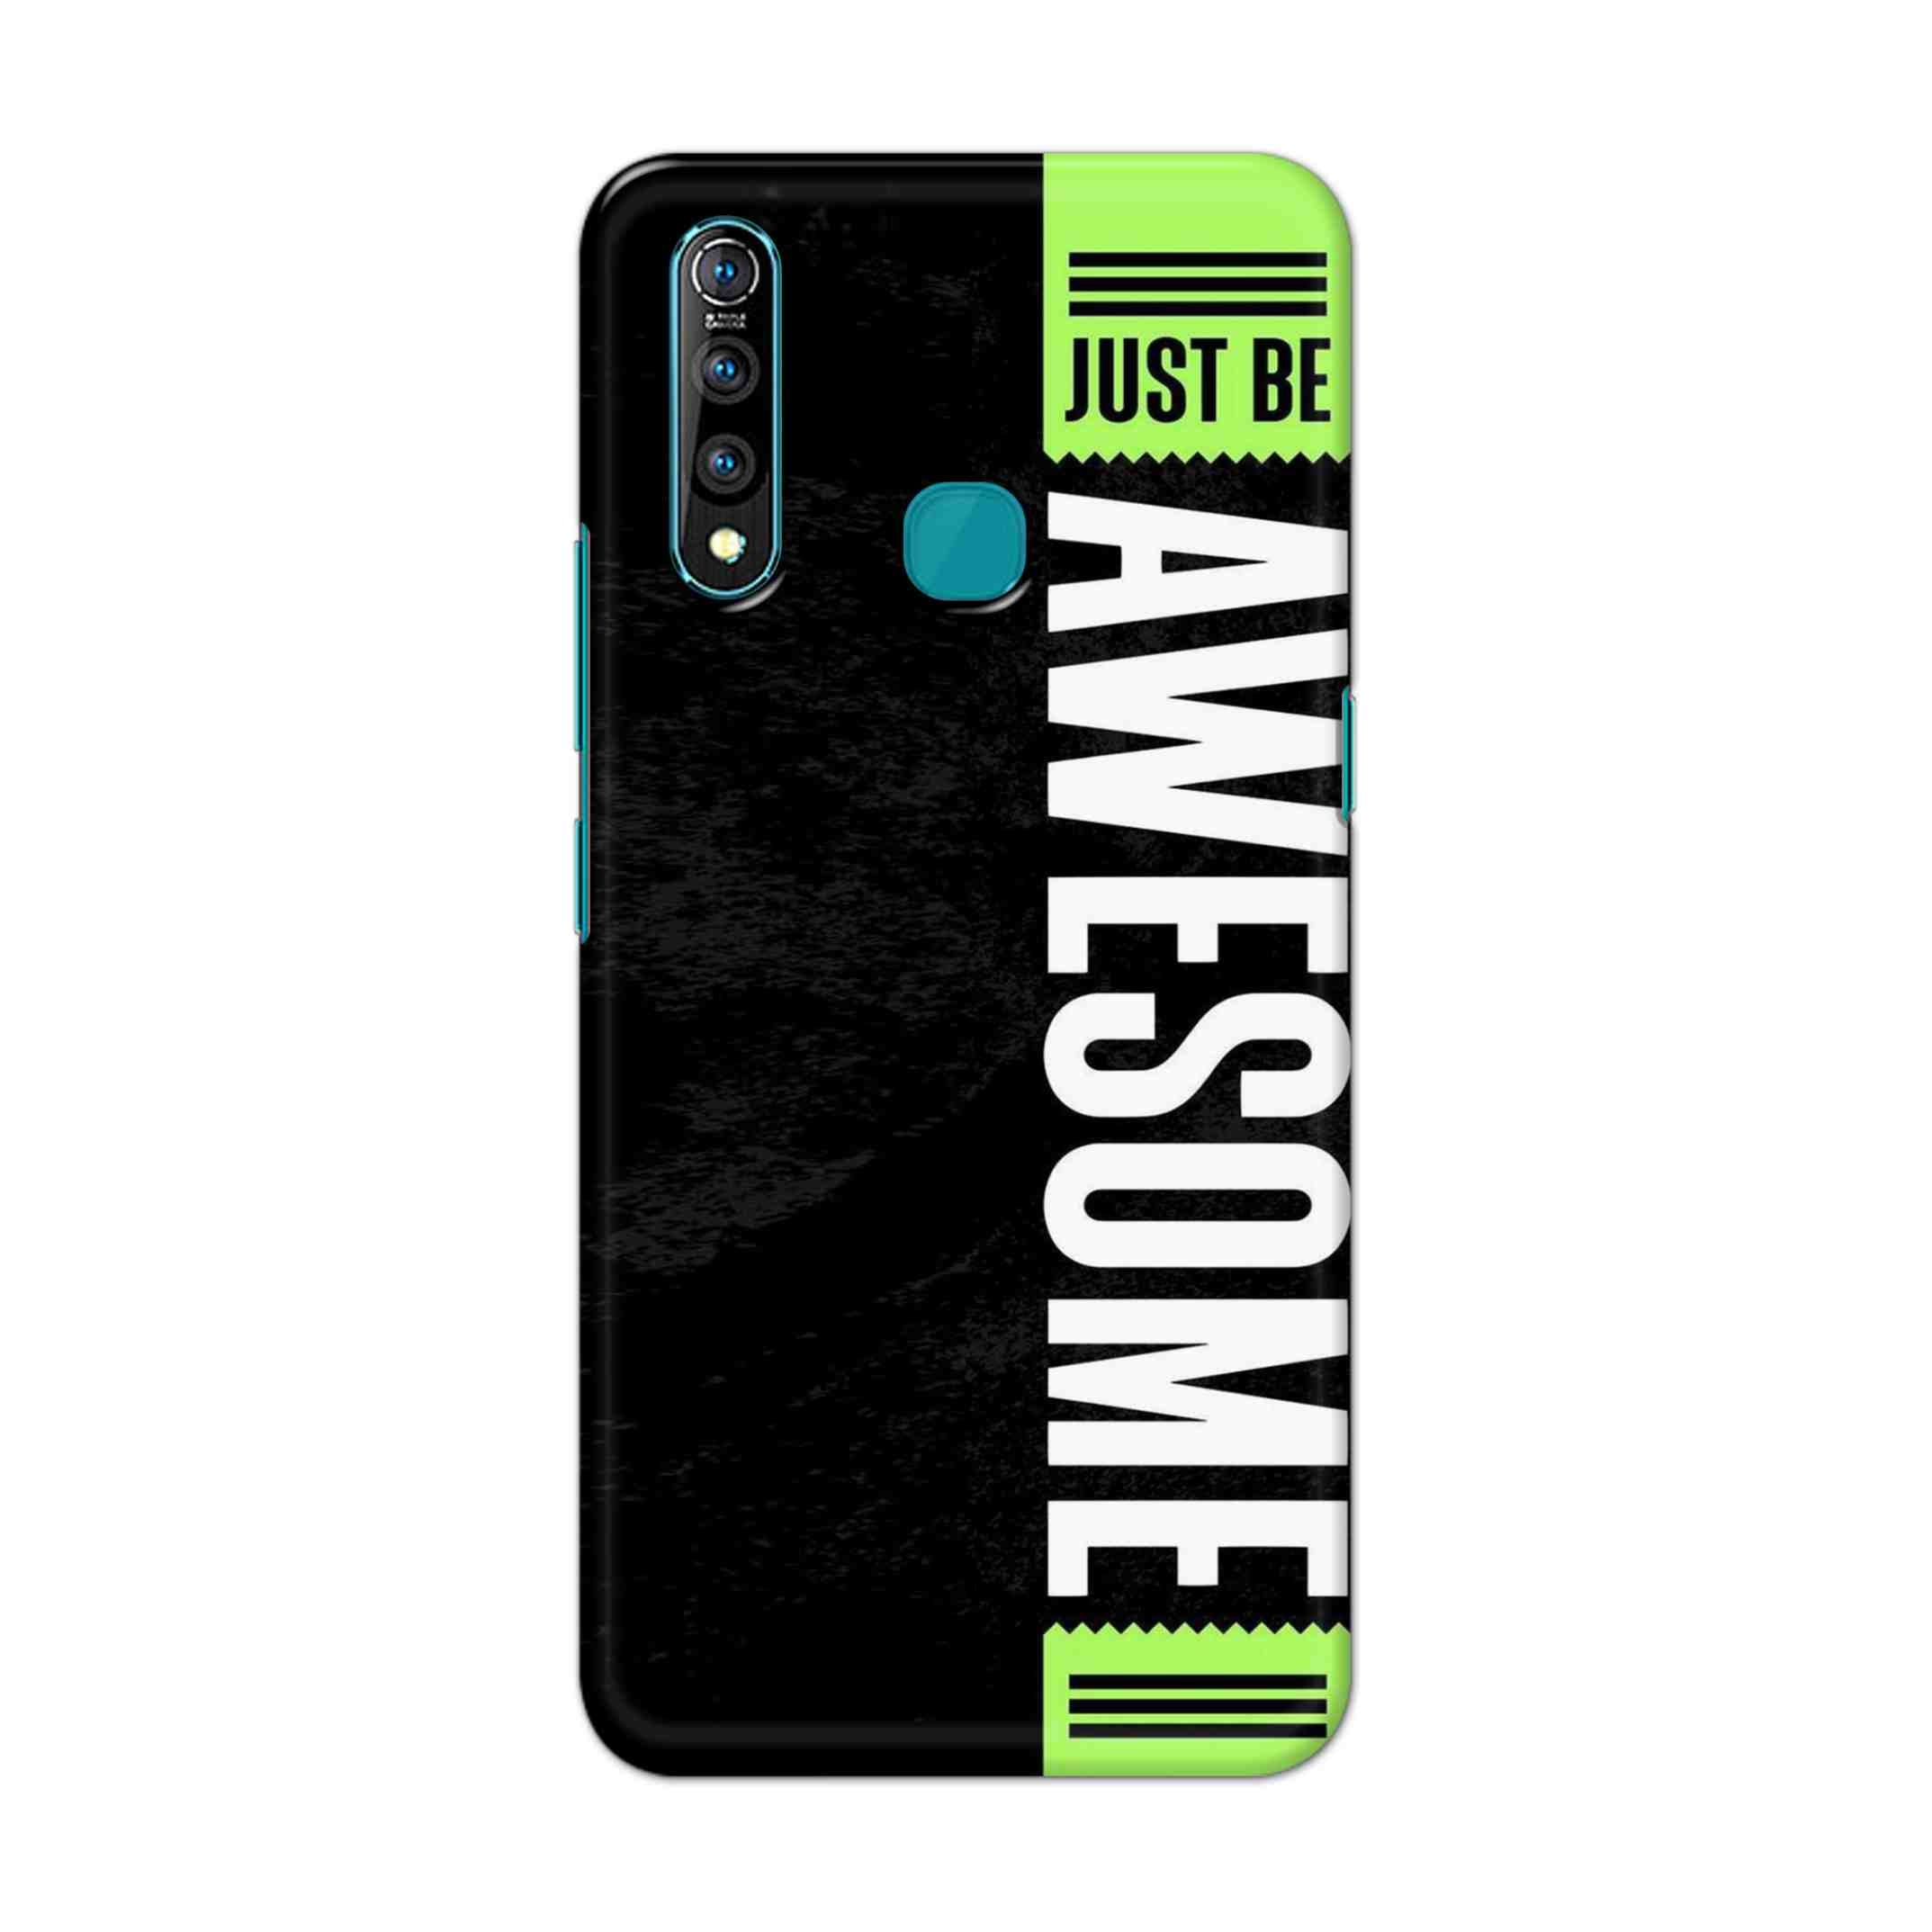 Buy Awesome Street Hard Back Mobile Phone Case Cover For Vivo Z1 pro Online